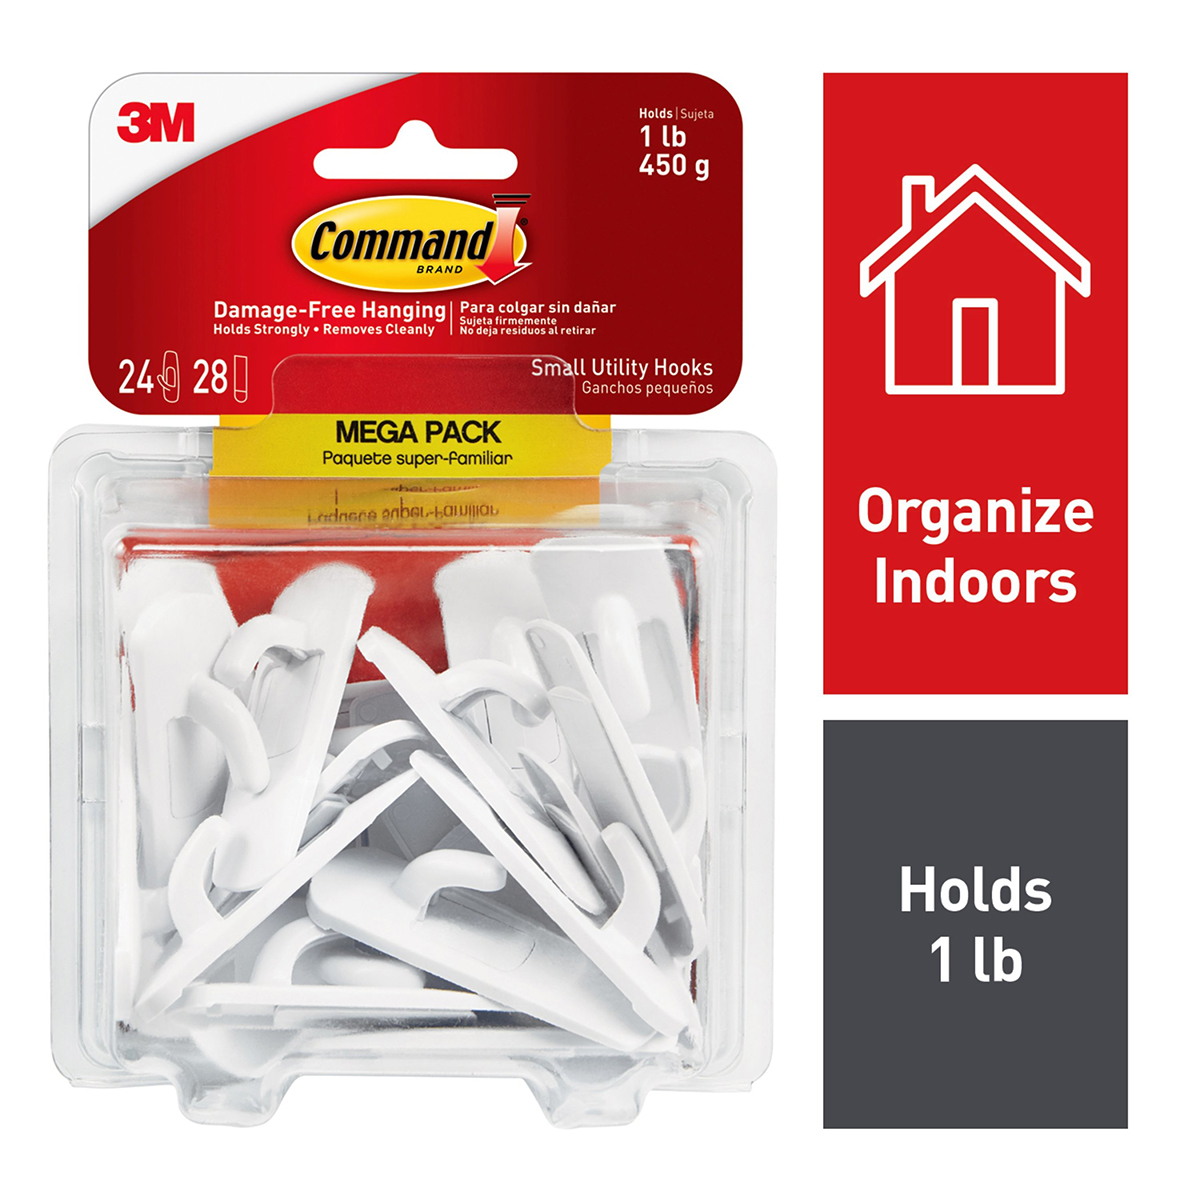 3M Command Adhesive Utility Hooks | The Container Store